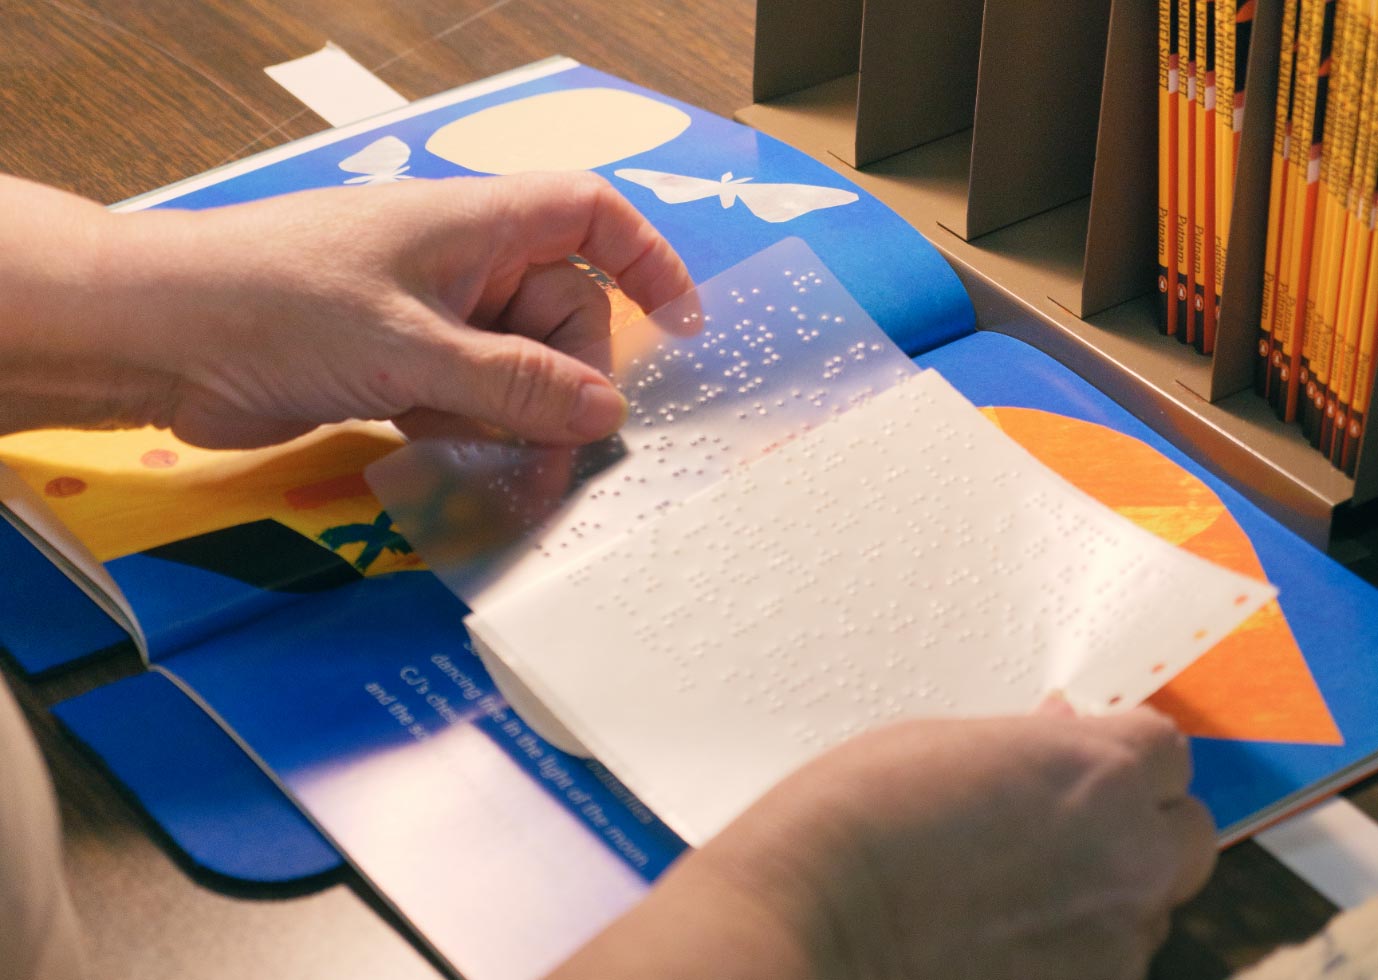 Hands affixing a braille label to a print storybook